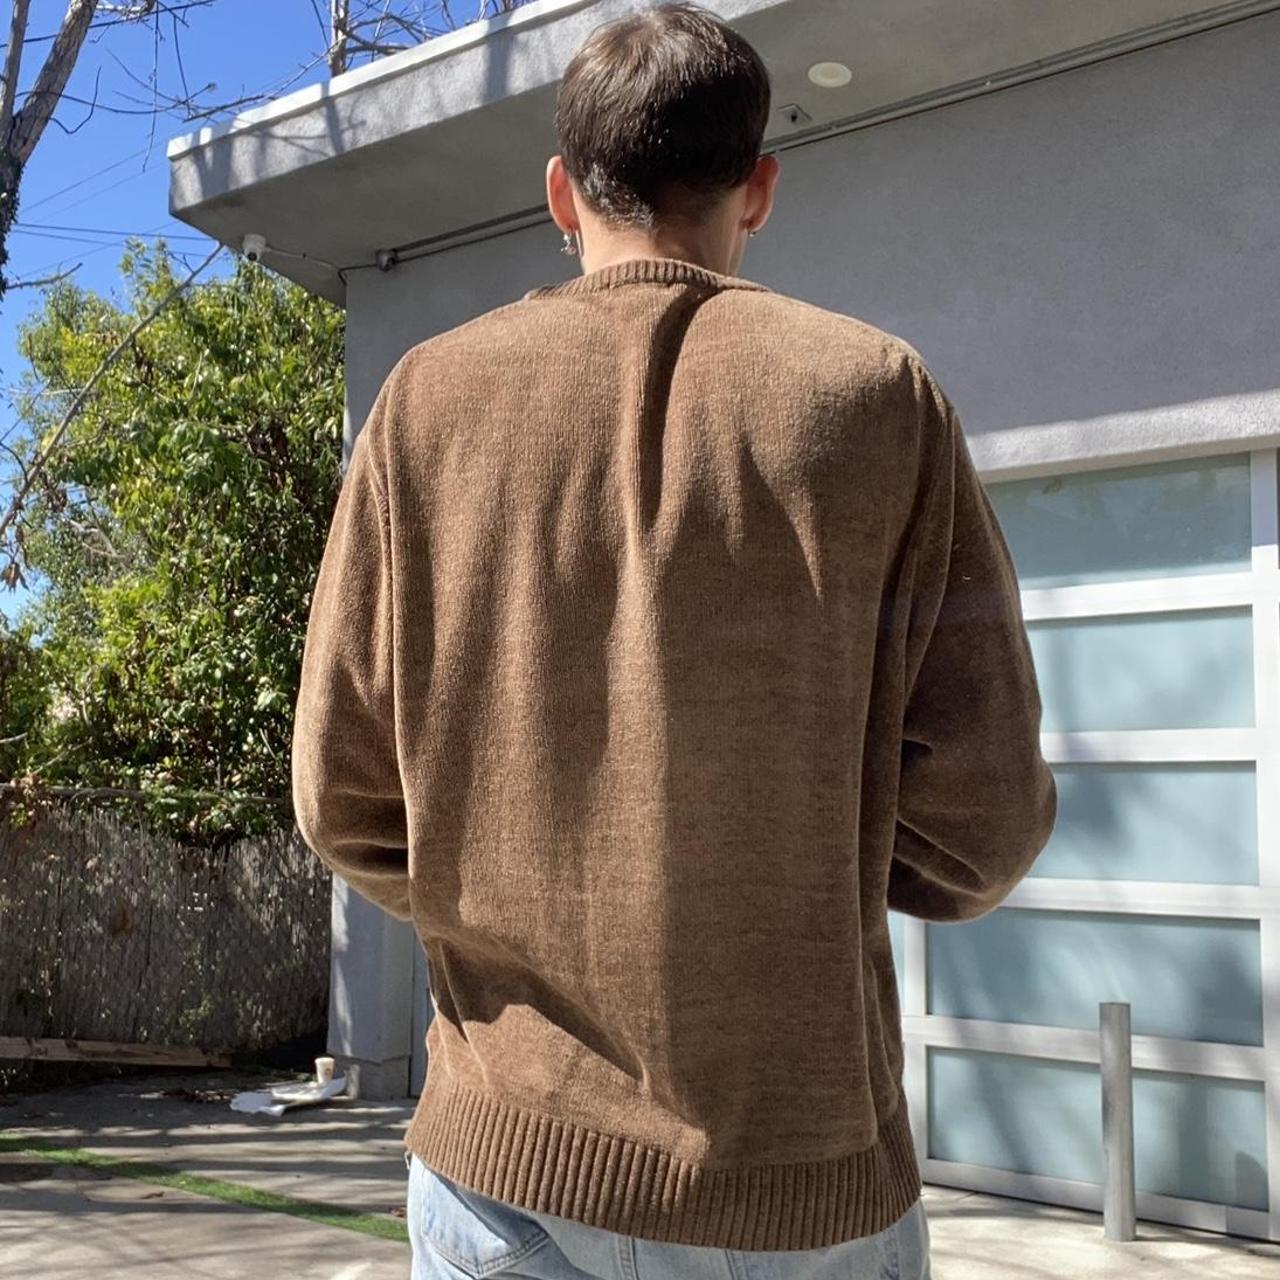 Product Image 2 - Dockers Lightweight pattern sweater. Size